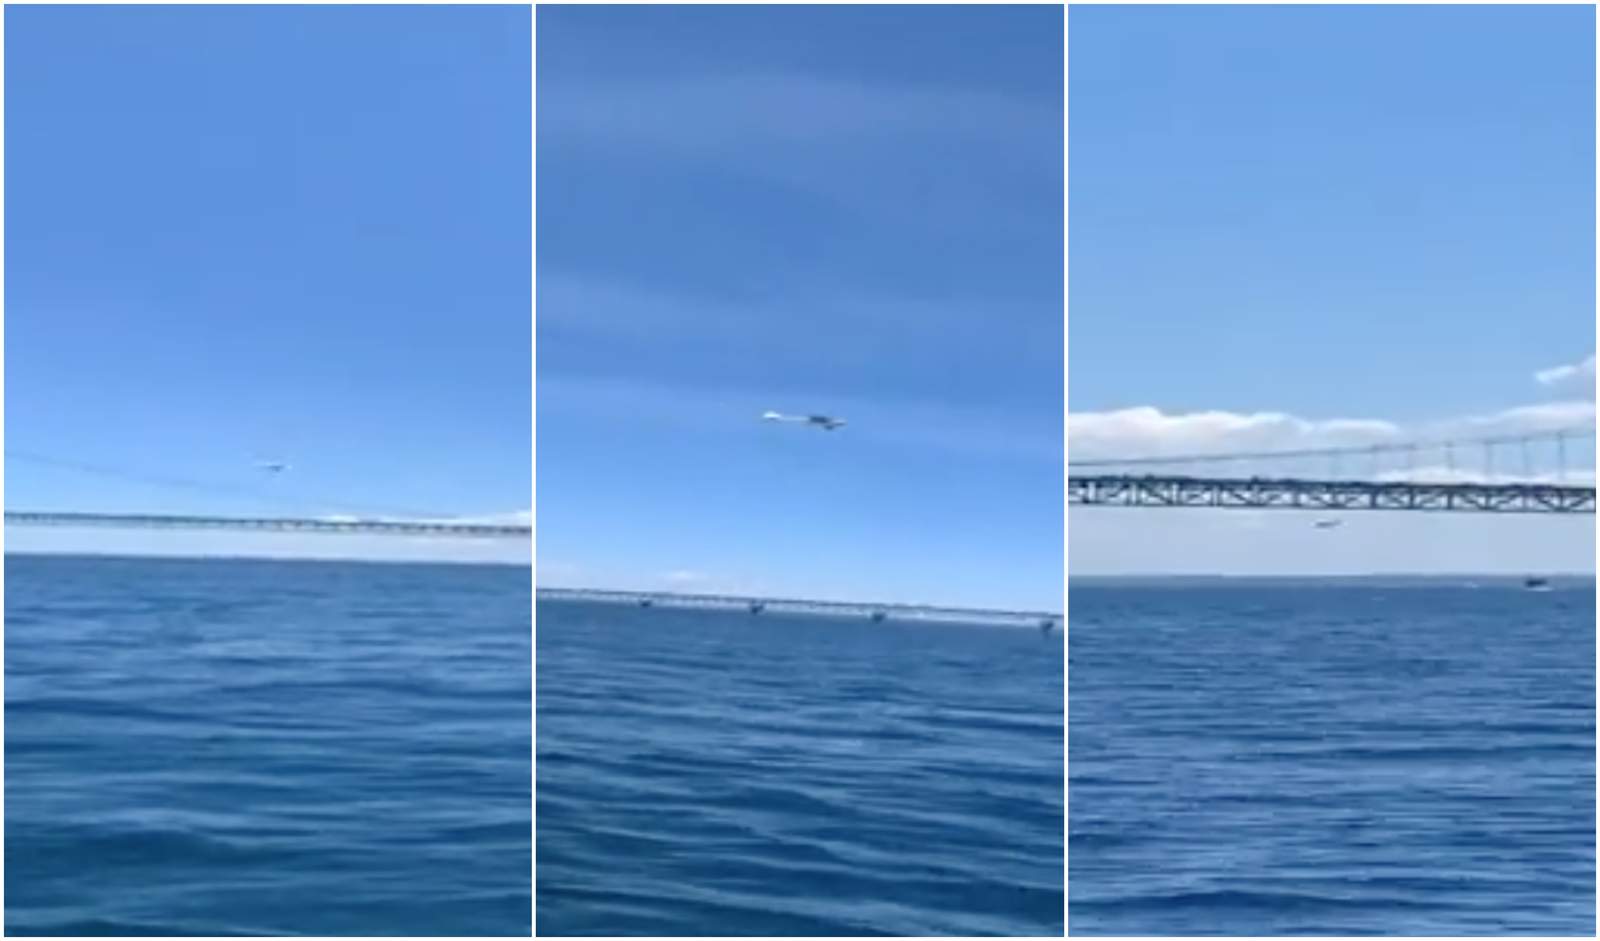 Info sought about plane that flew under Mackinac Bridge: See video